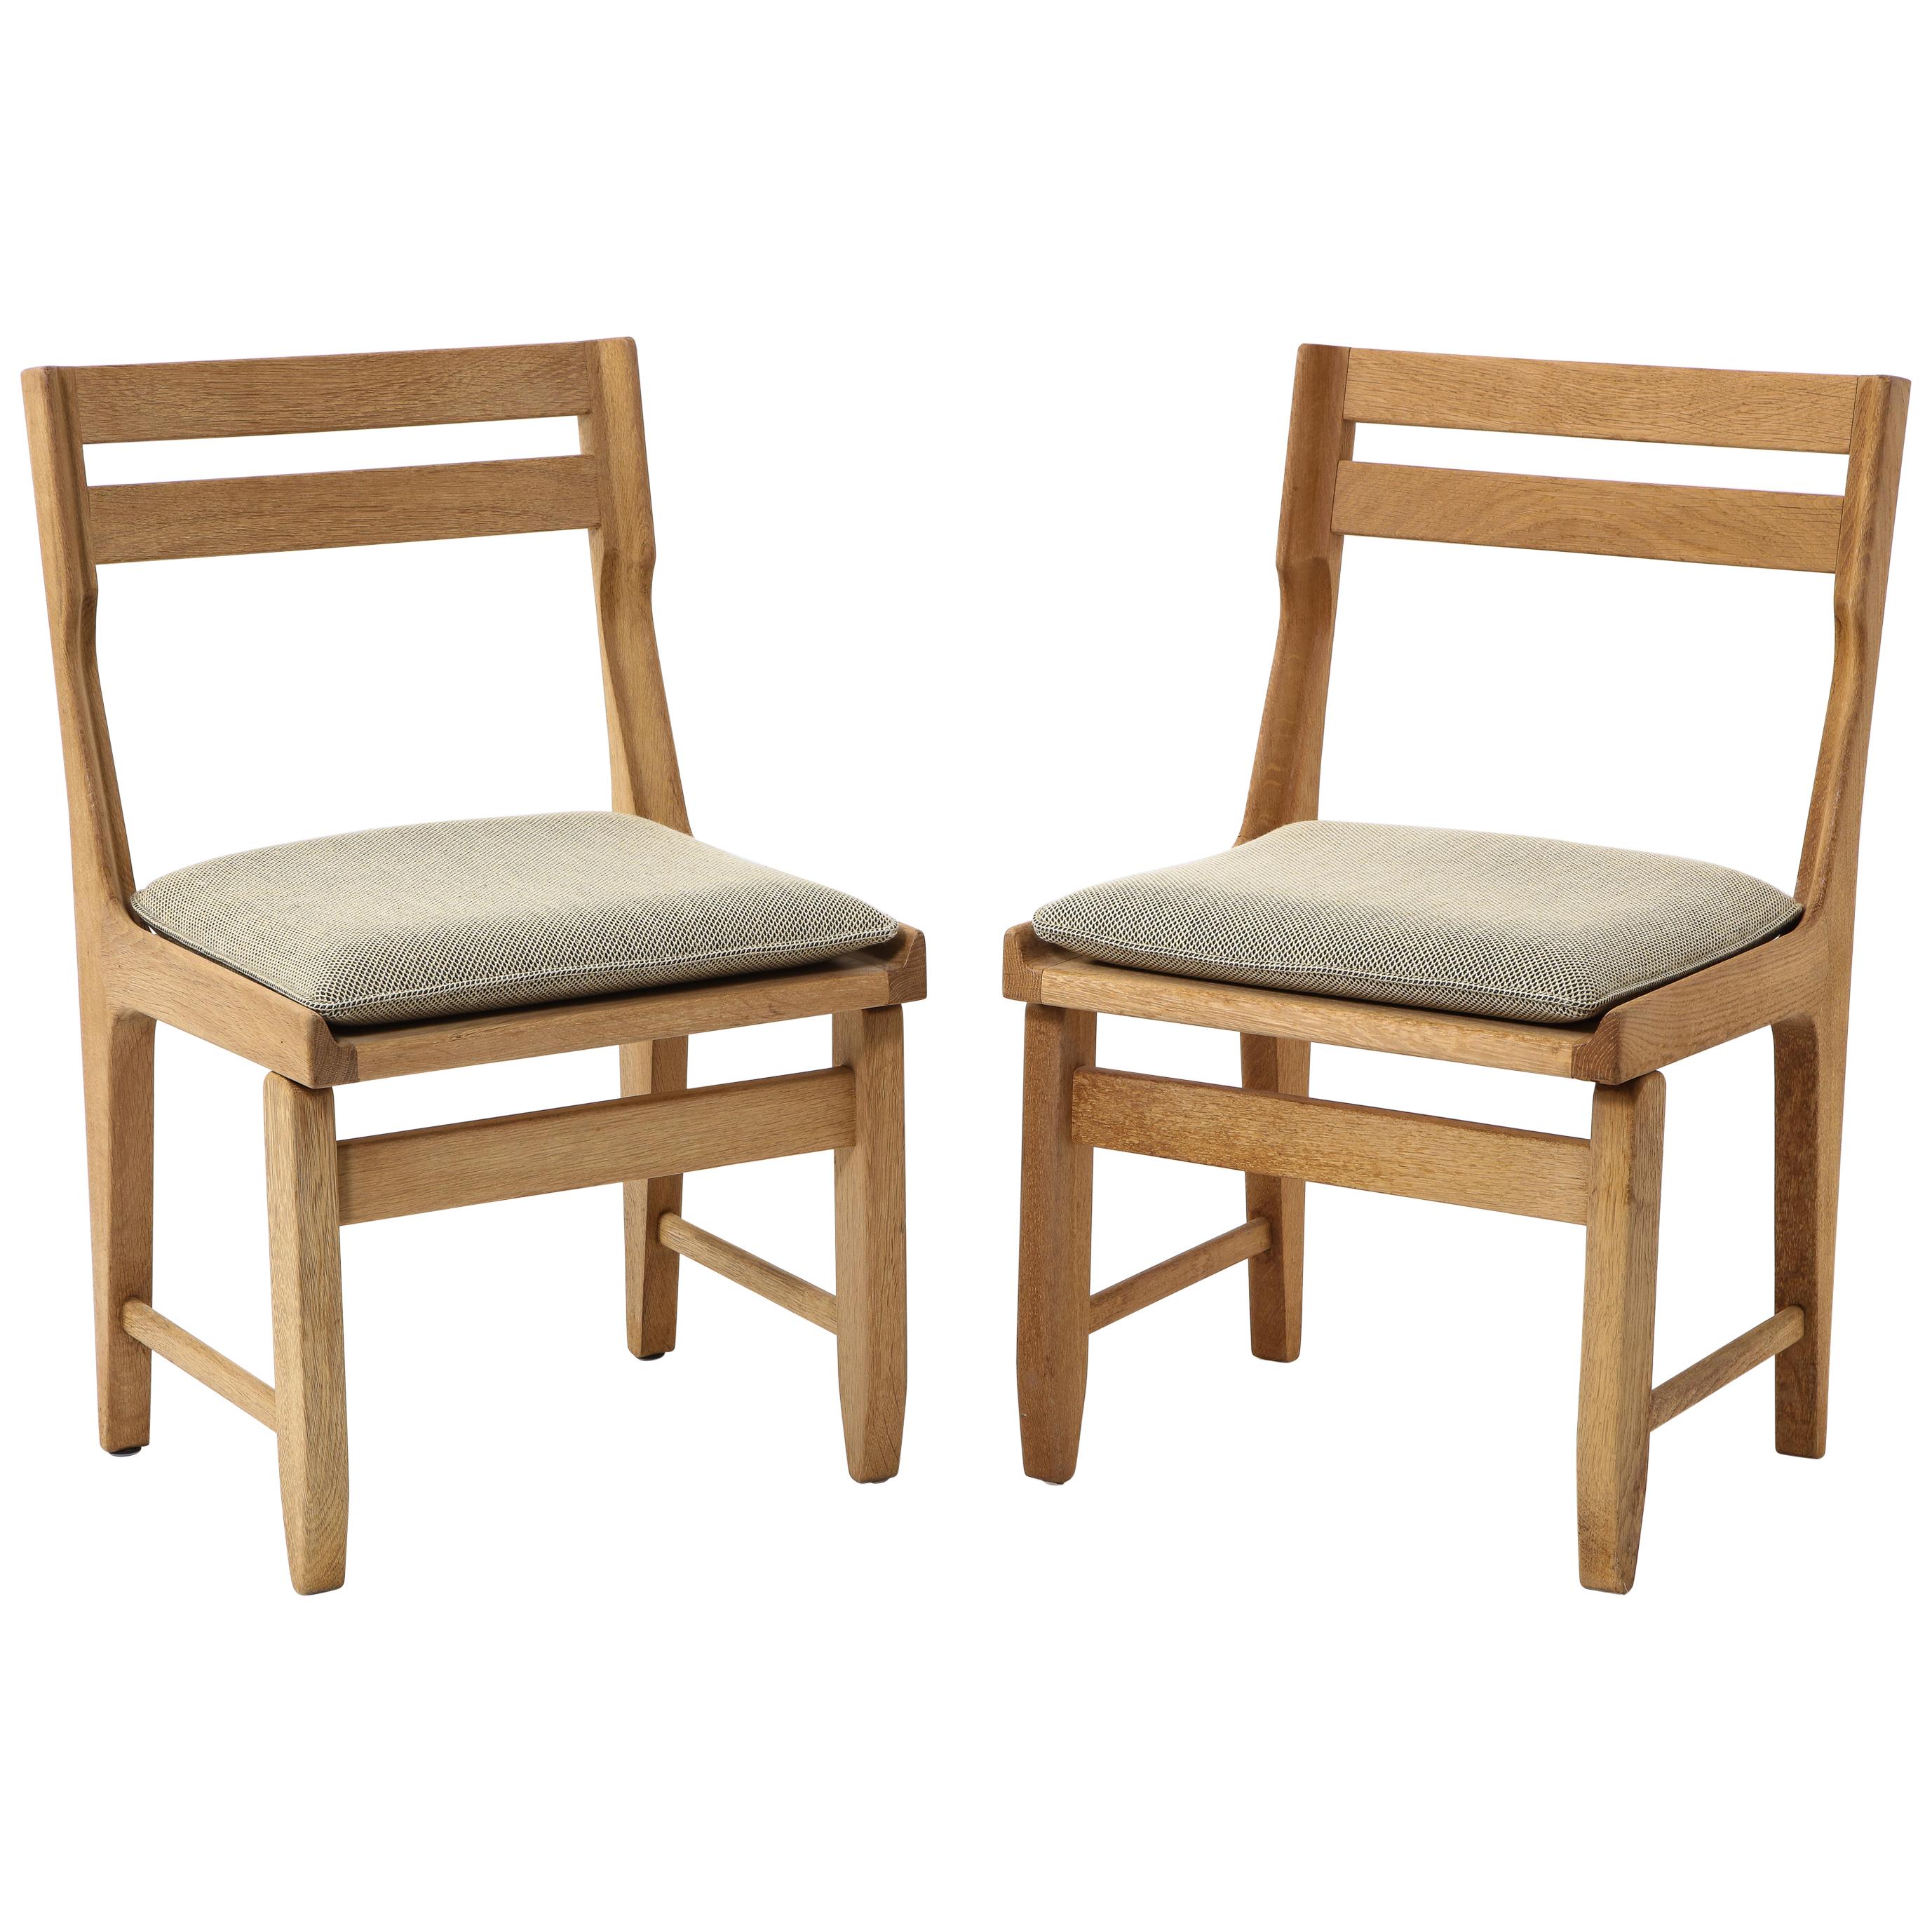 Pair of Solid Oak Guillerme & Chambron Chairs, France, 1970s